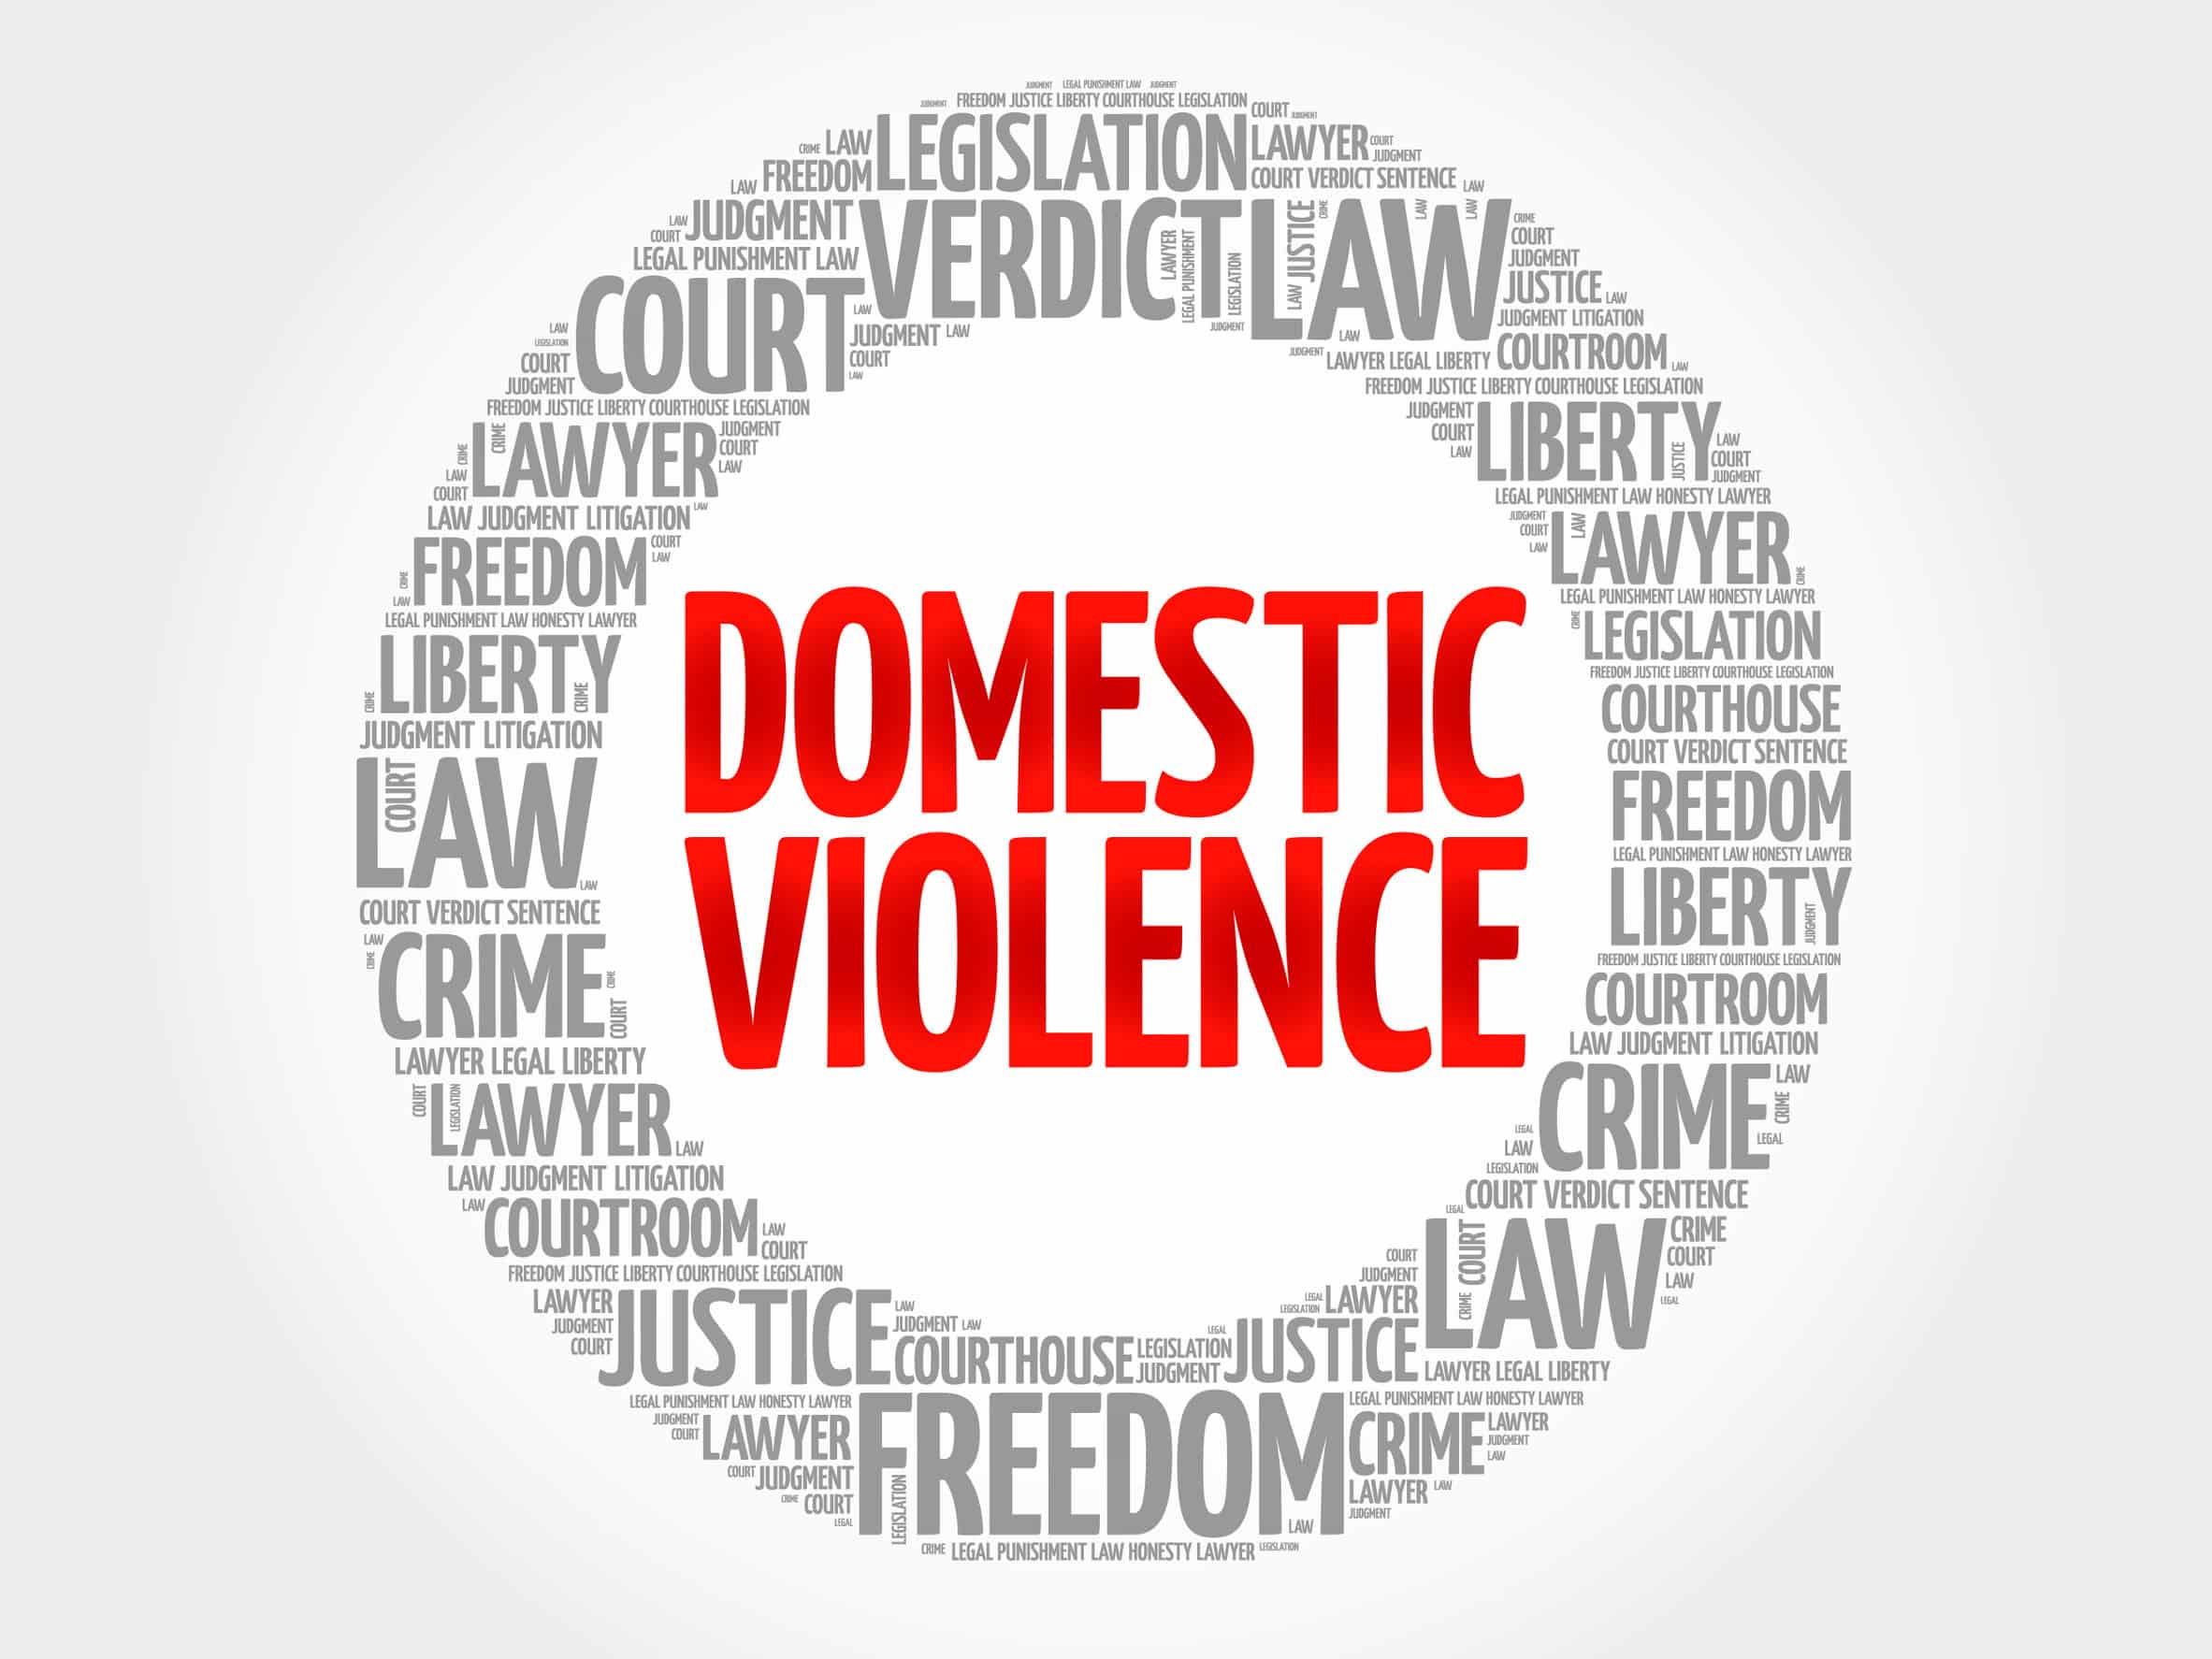 IL: Difference Between Domestic Violence and Sexual Violence